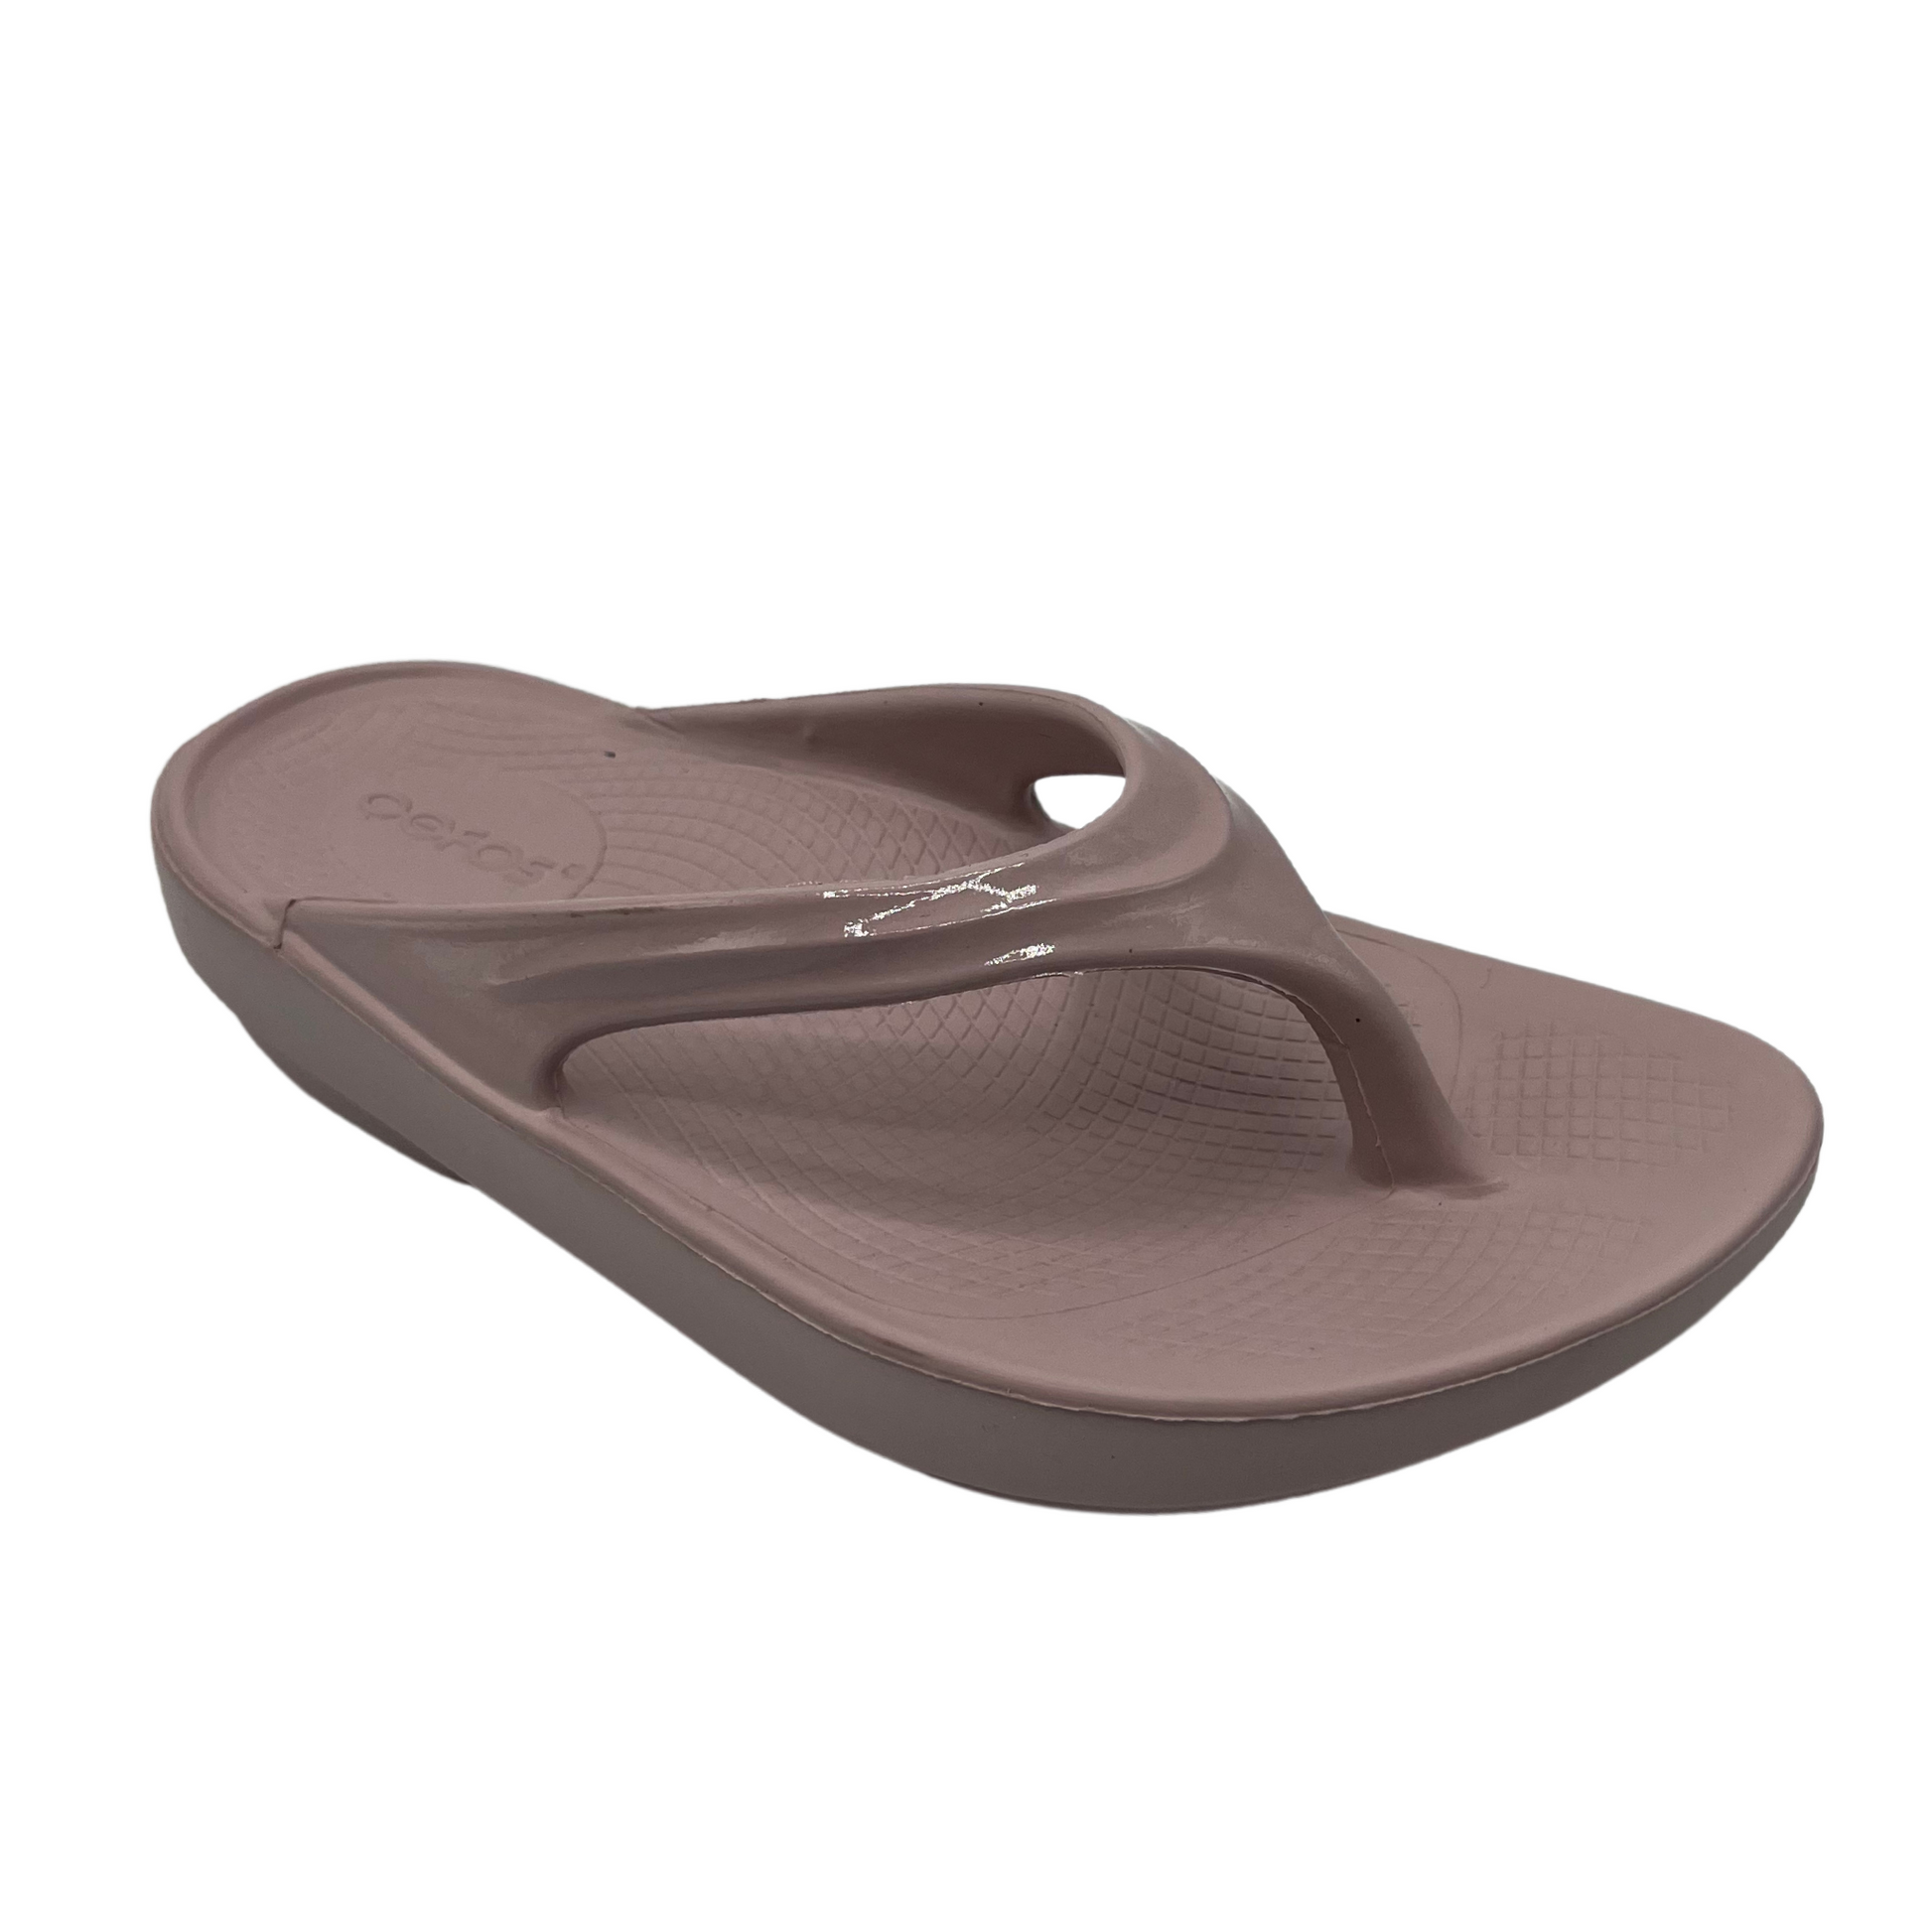 45 degree angled view of pink foam thong sandal